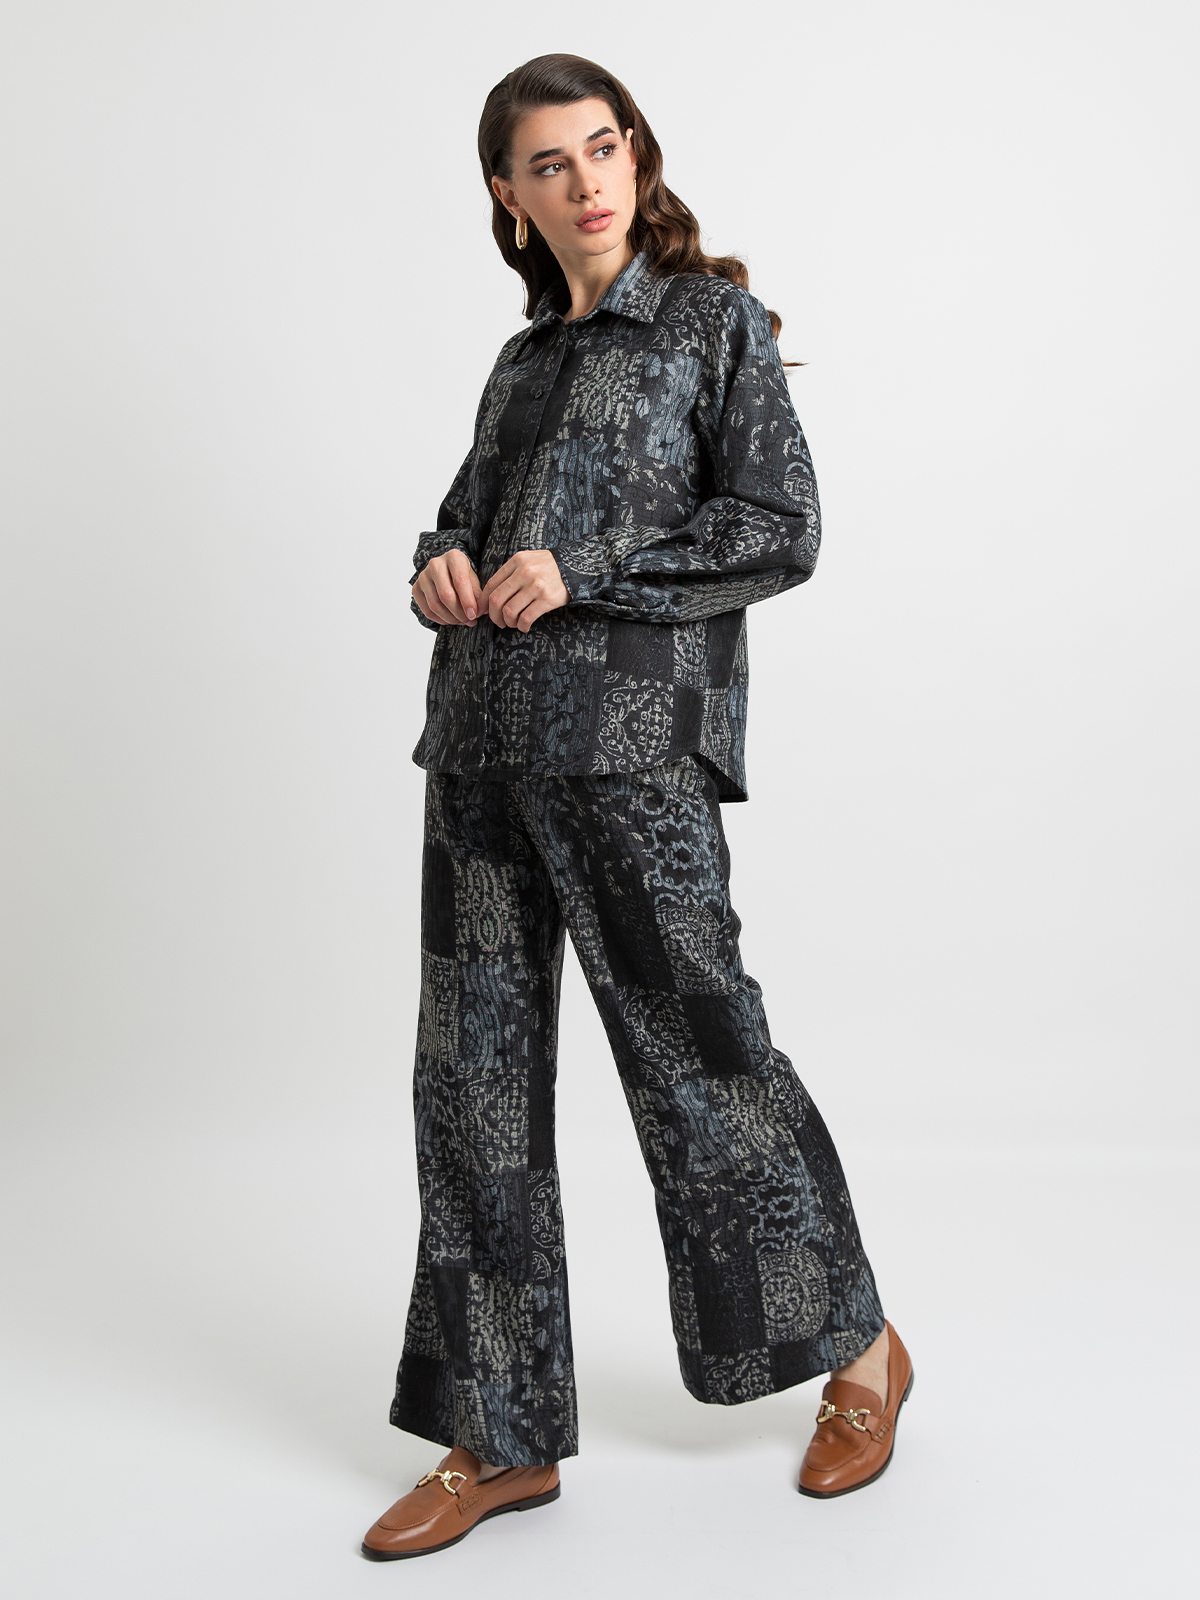 Dark Gray with Boho Print - Flared Pants With Reguler-fit Shirt Set in Cotton-feel Fabric